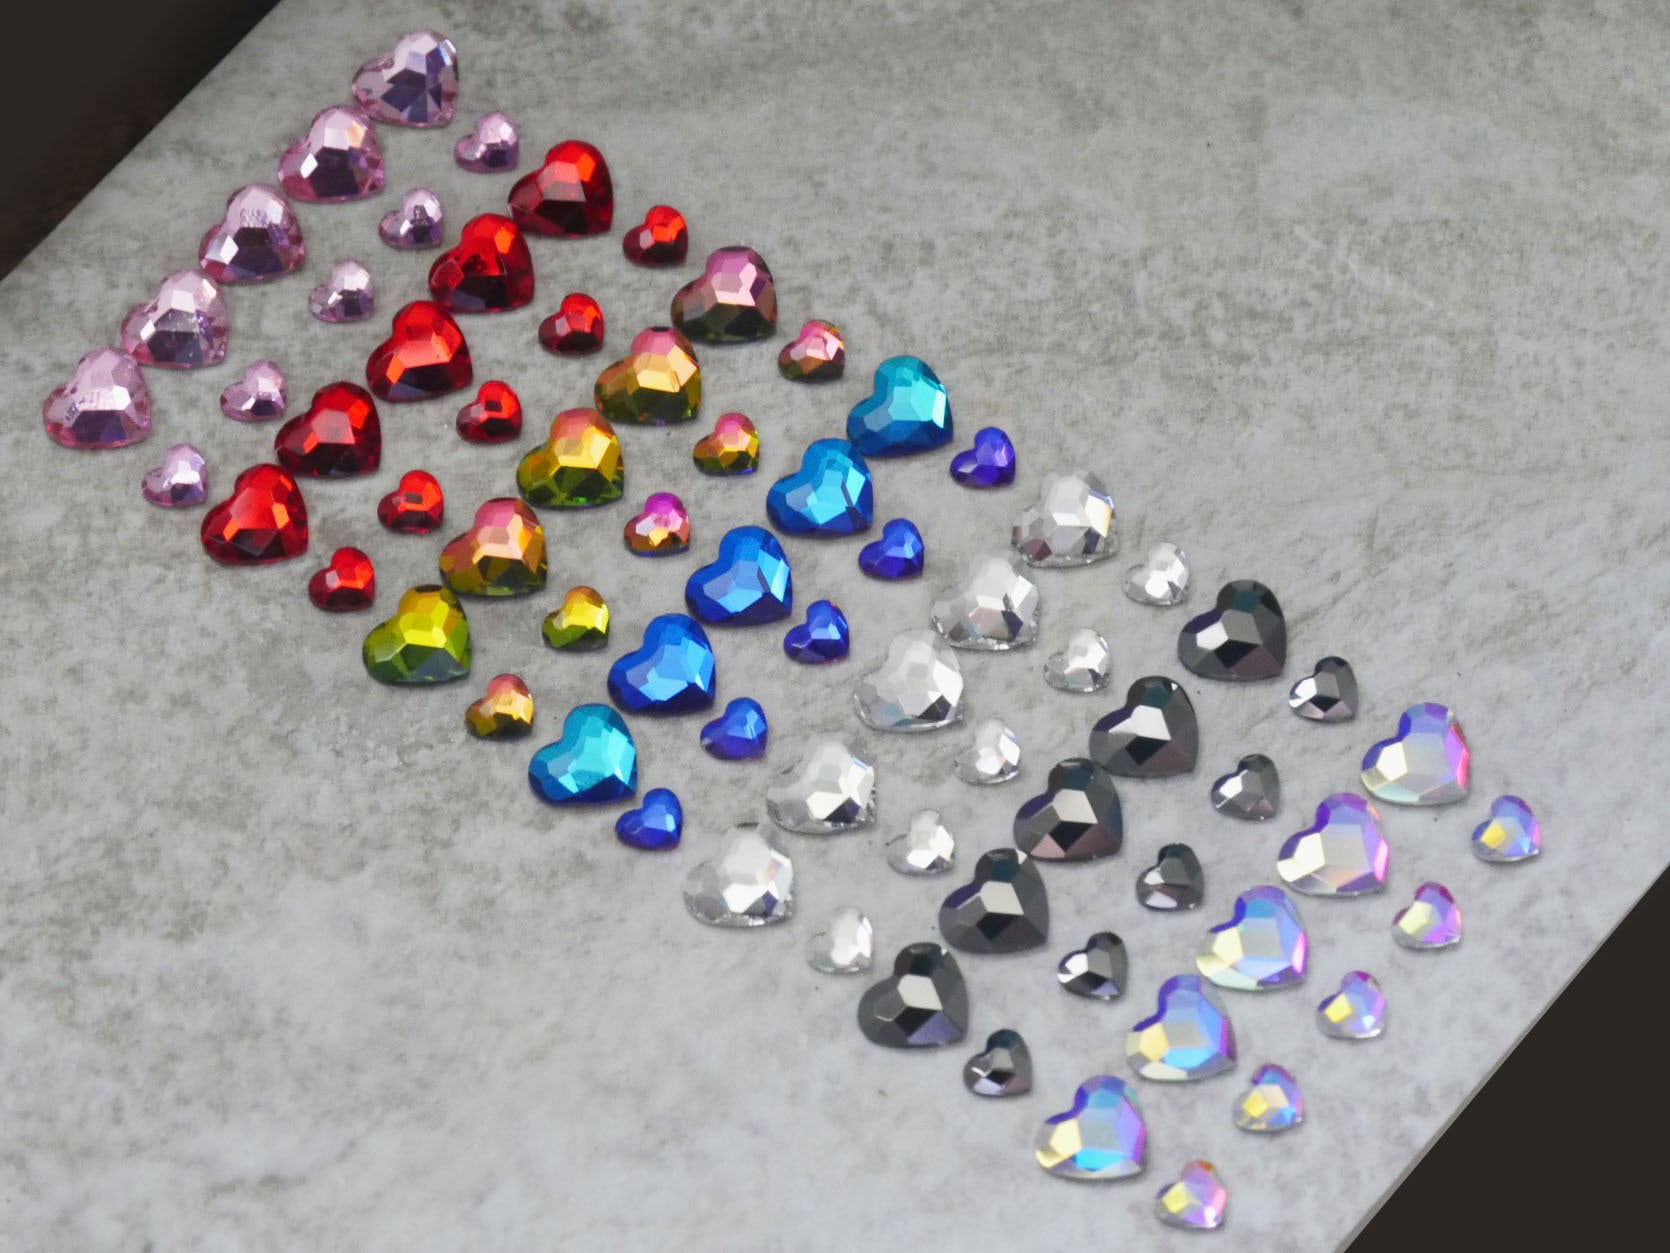 10 pcs 3D Heart Shaped Nail Charms Nail art Jewelry Accessories Decal/ Super Shine Bling Hearts Nails Supply